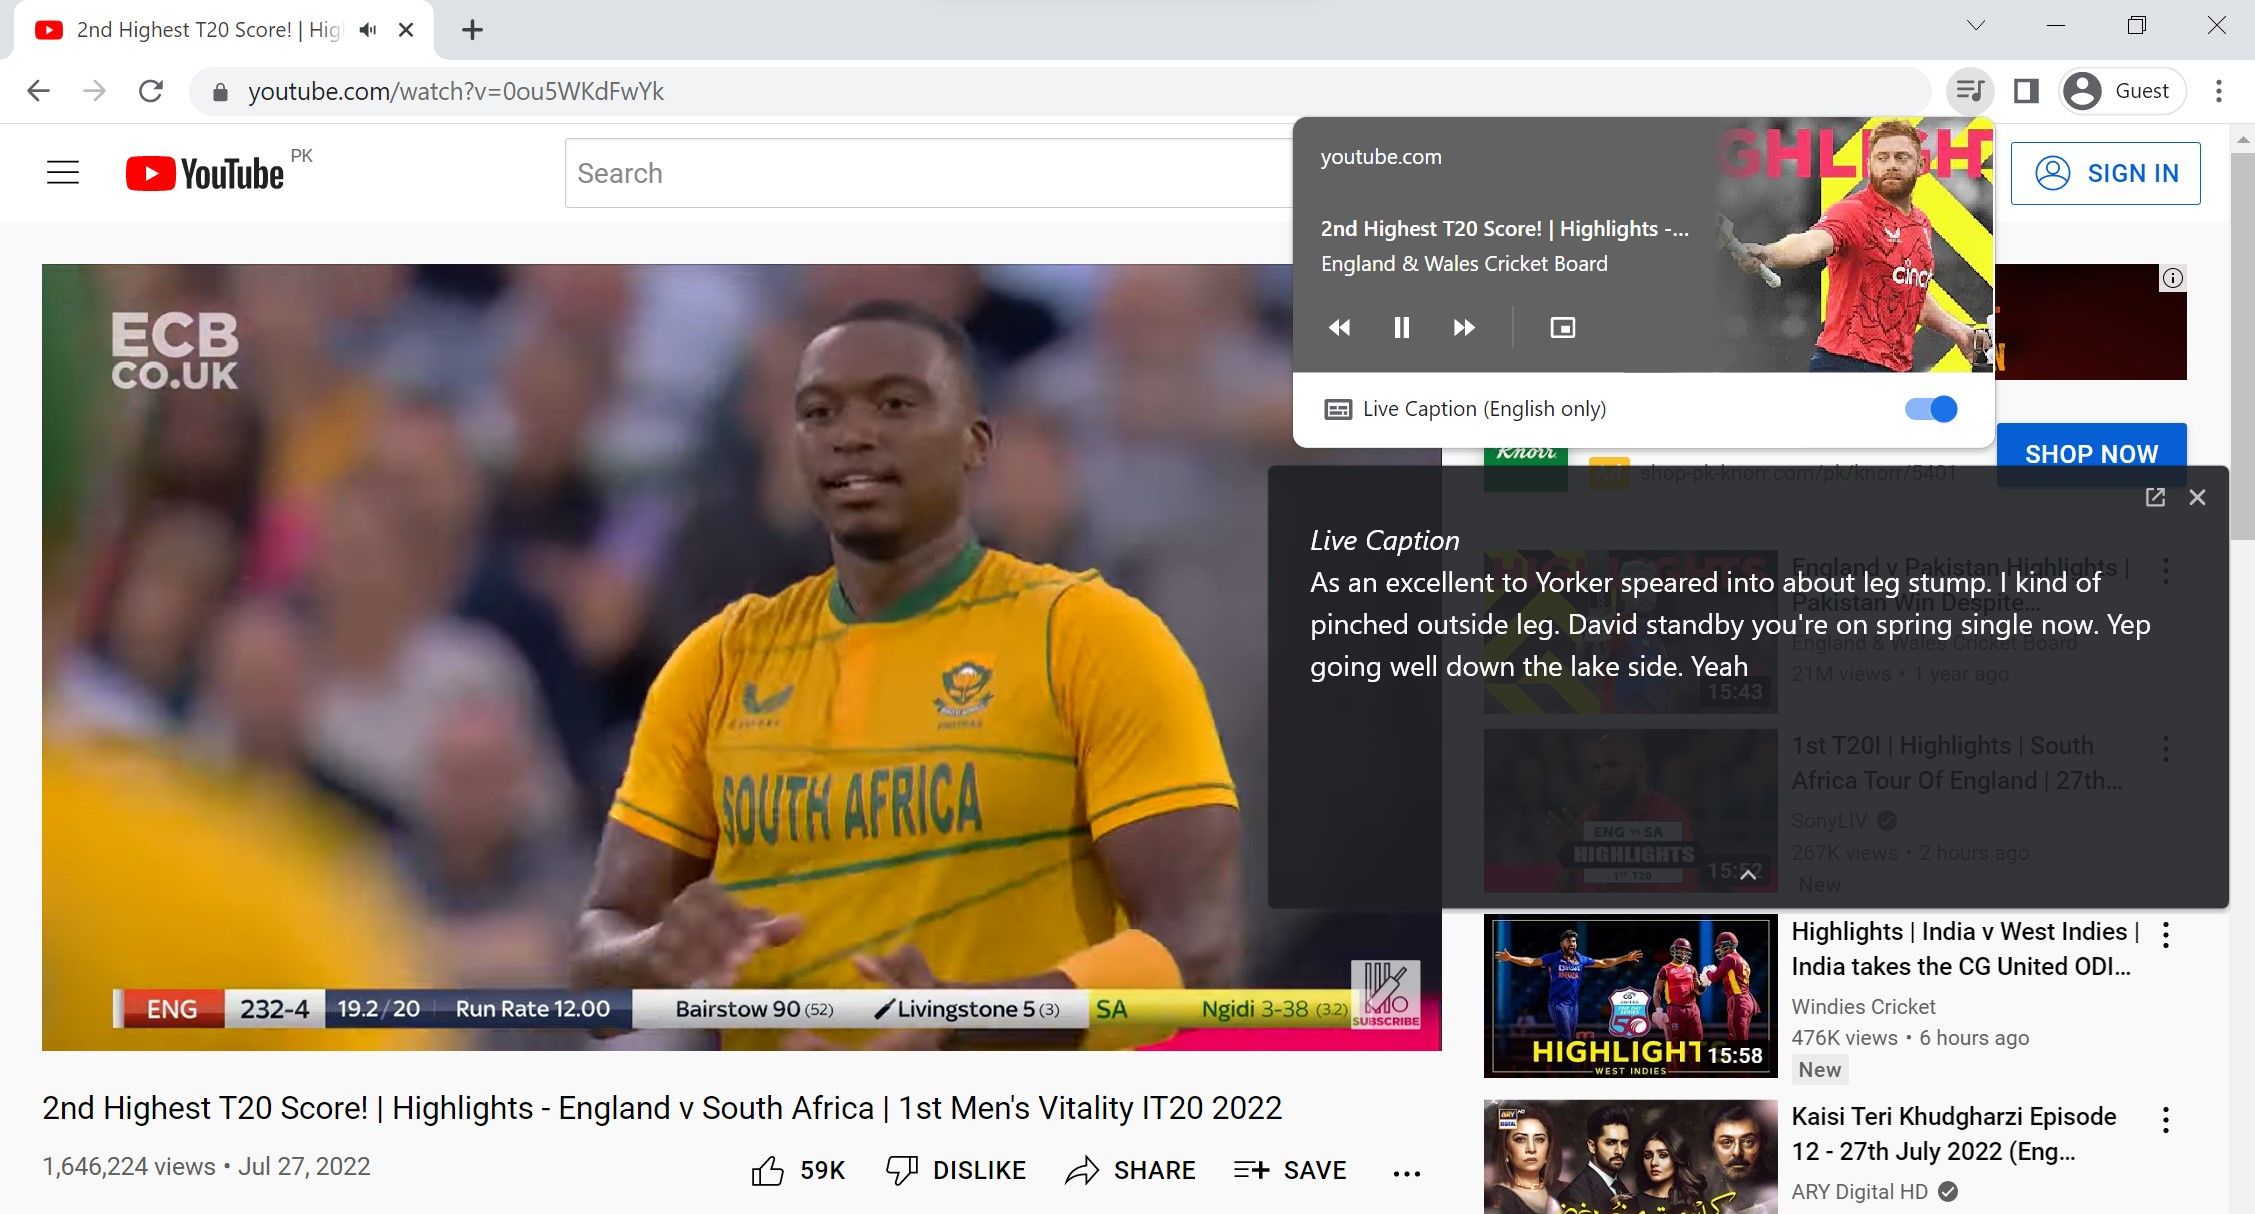 Disabling Live Caption Feature Using Chrome's Media Playback Control